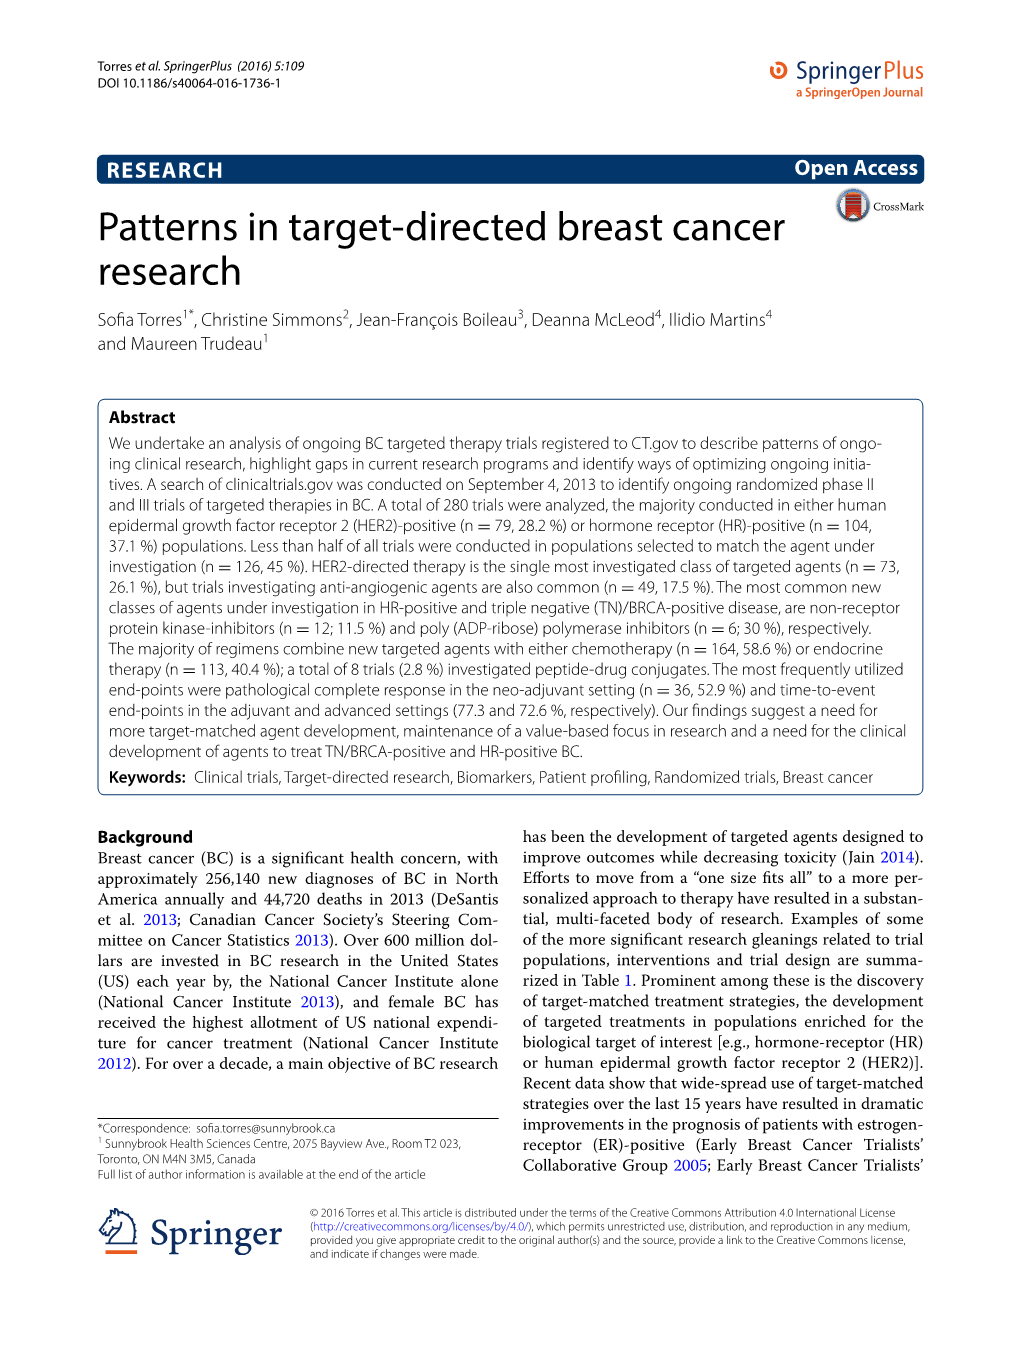 Patterns in Target-Directed Breast Cancer Research